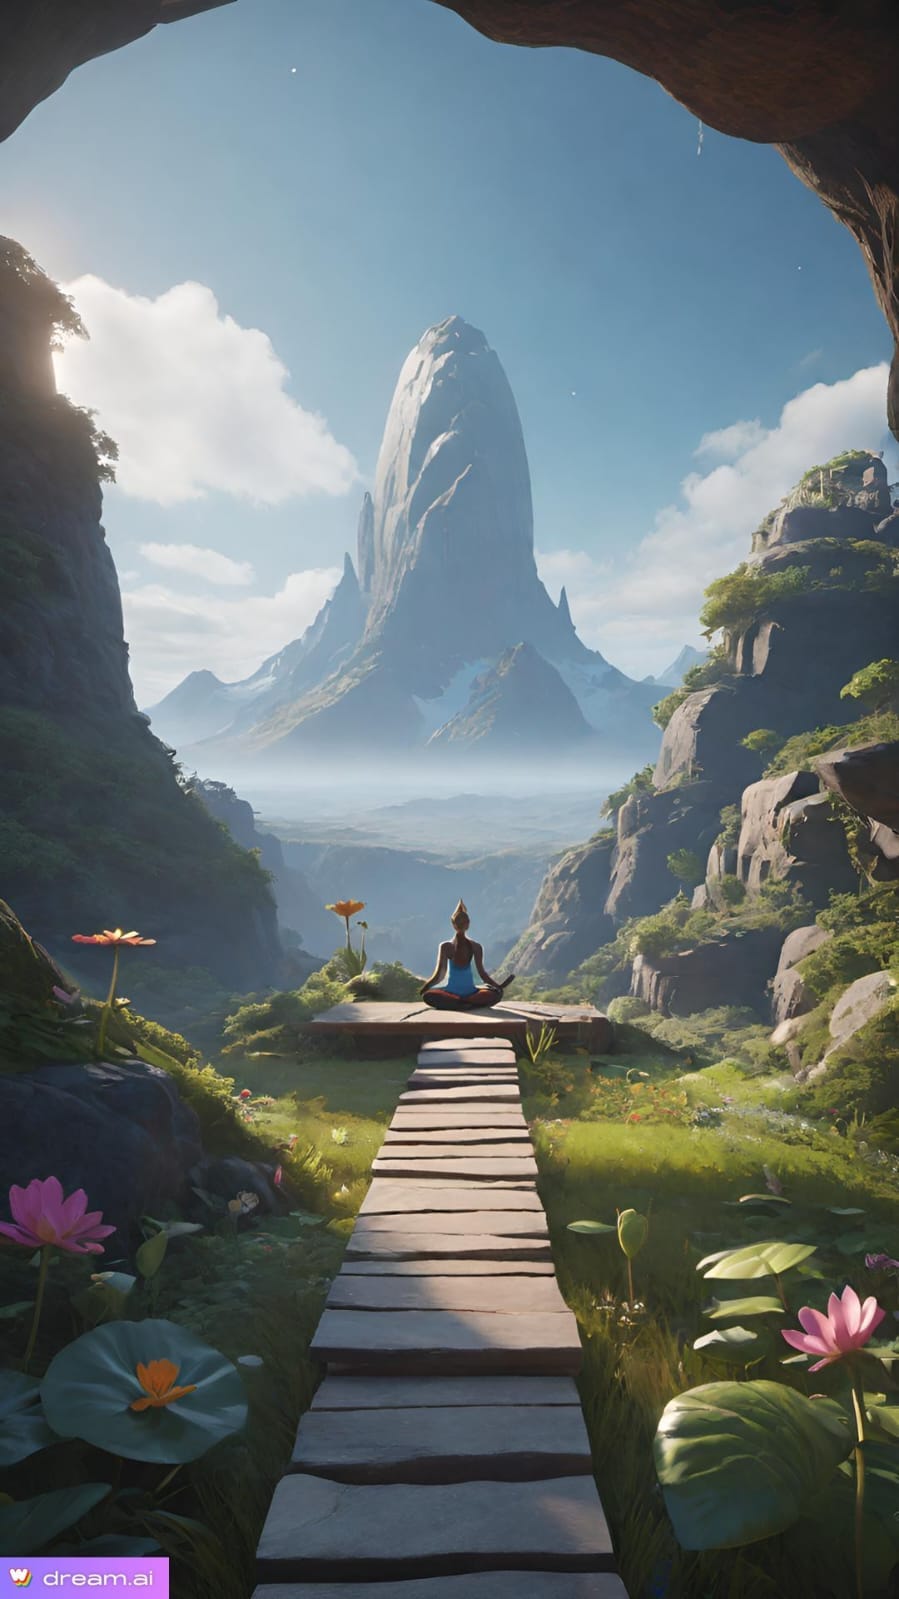 If you prompt an AI image generator with nothing but 'yogaland' you get a lone figure sat in lotus pose looking at mountains.